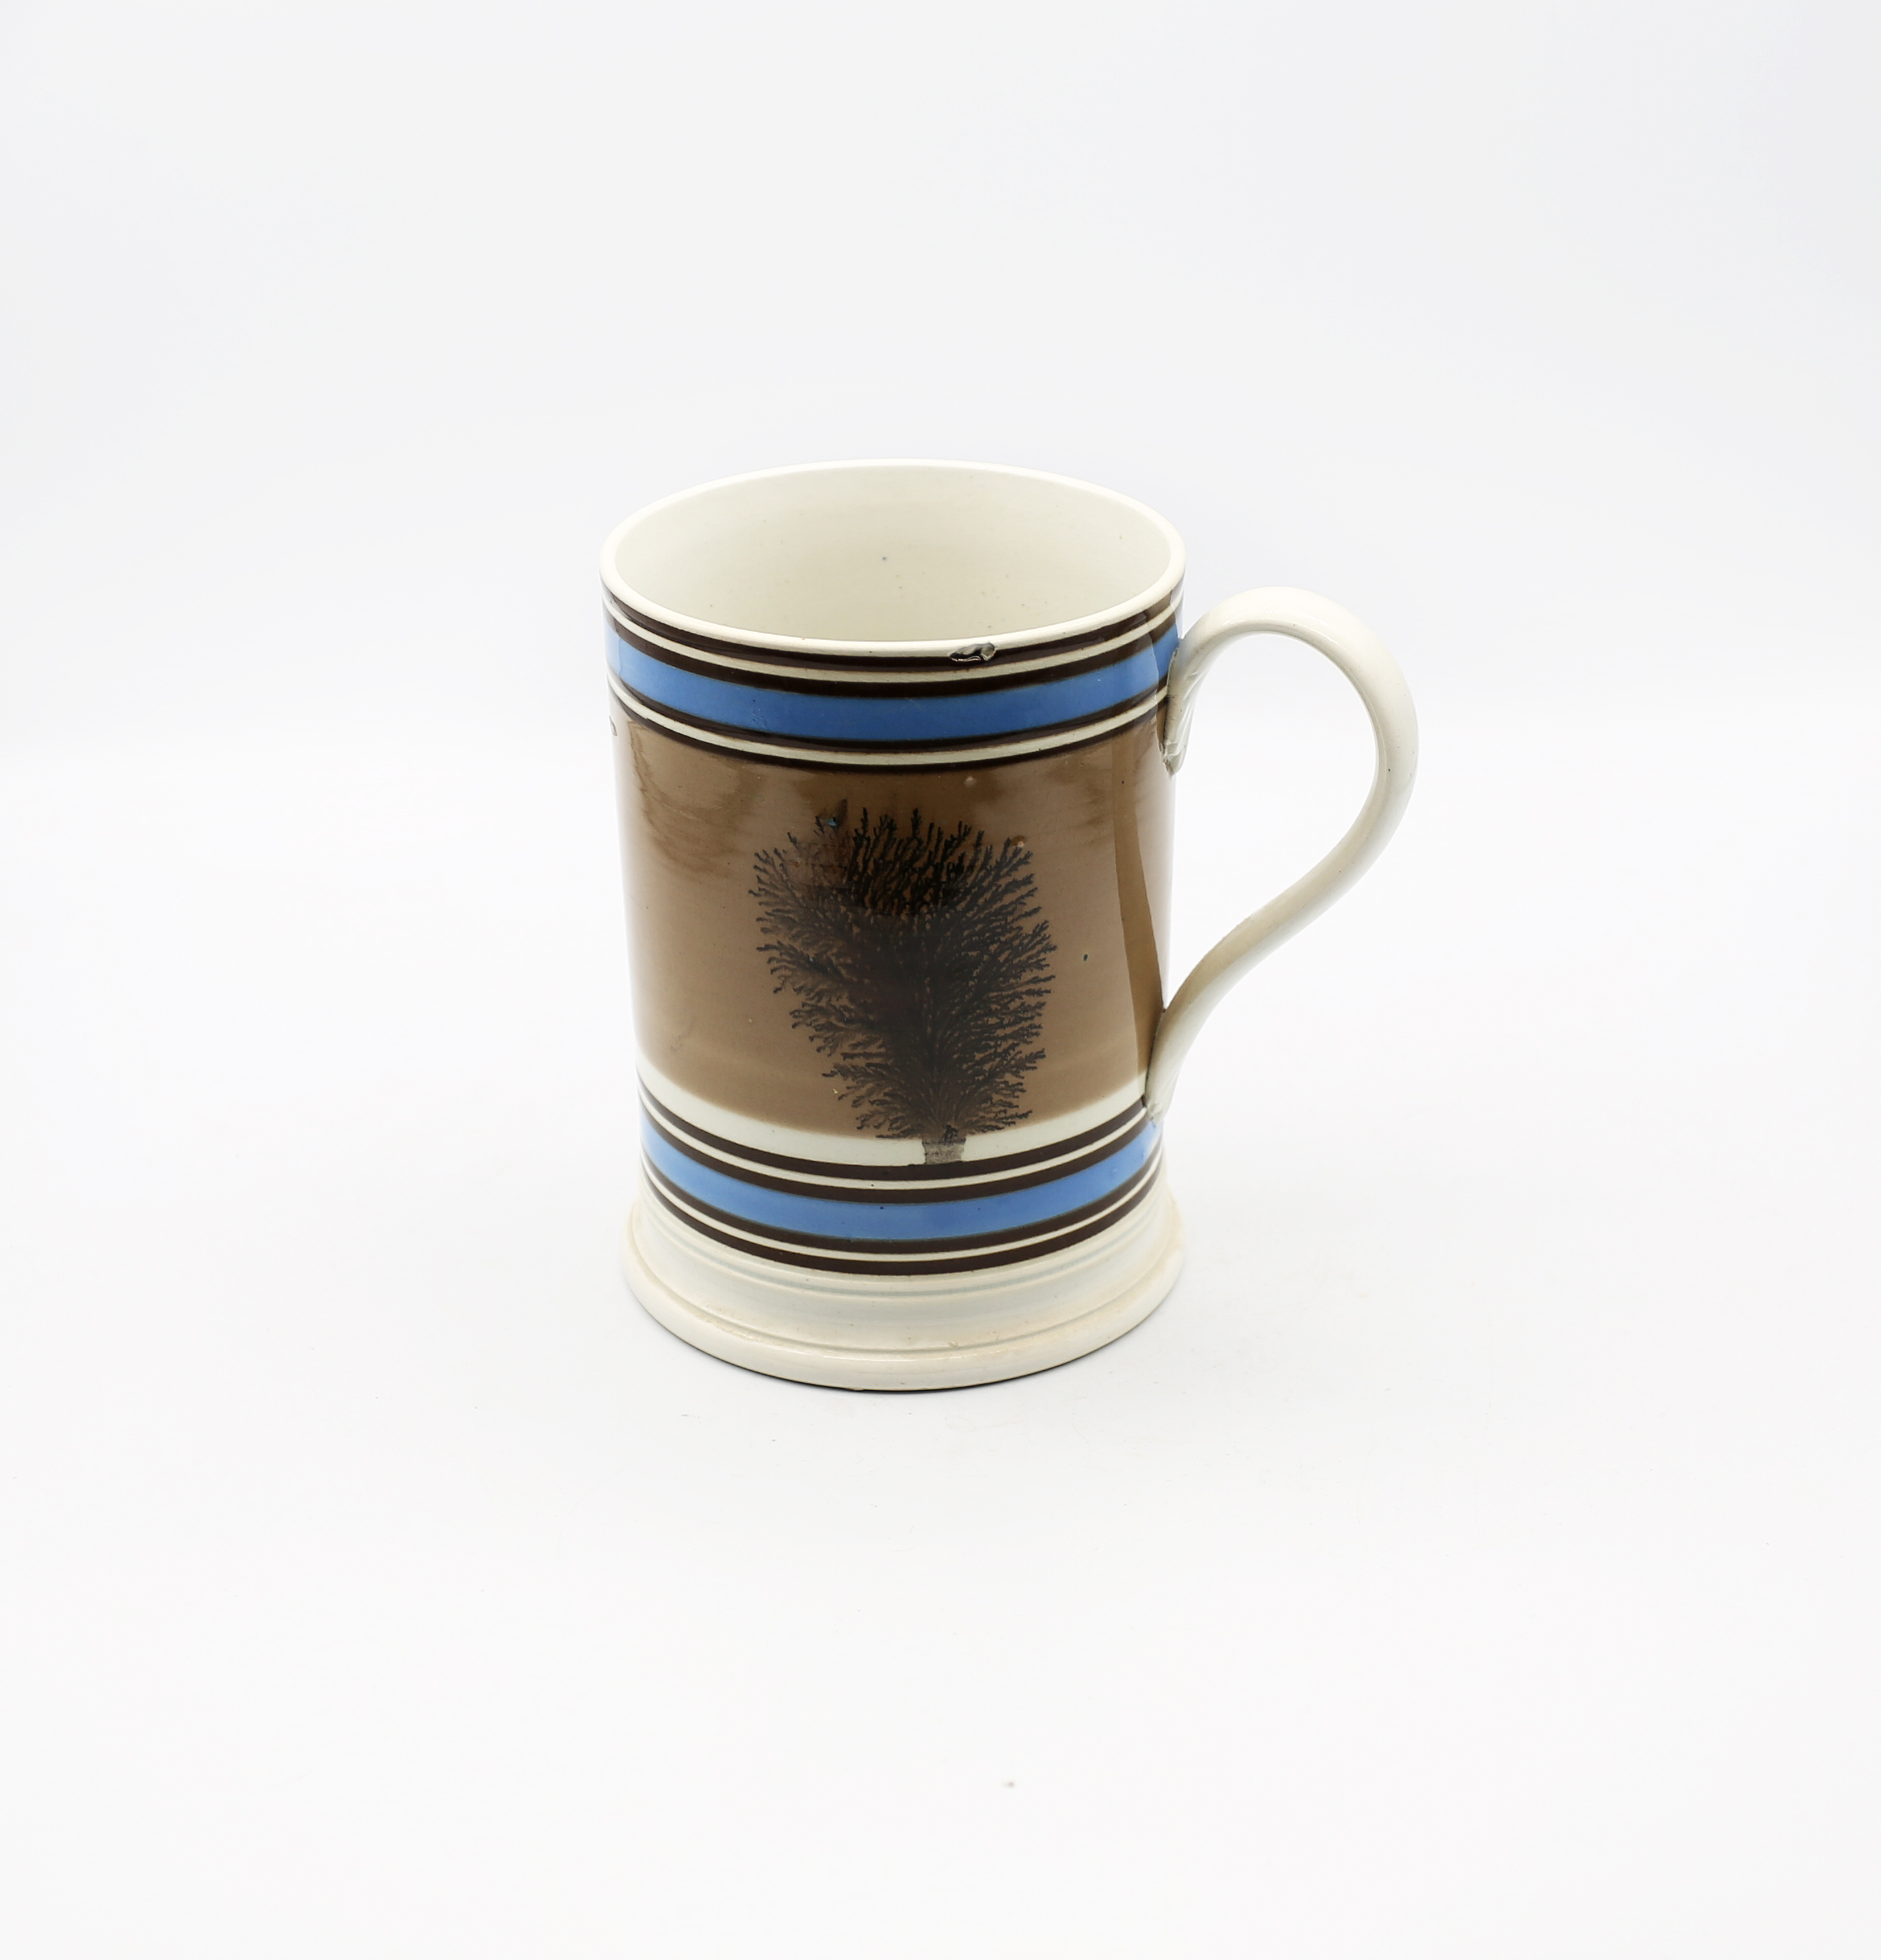 A Mocha ware mug. Quart size, mushroom ground with black feathered trees and blue and black bands